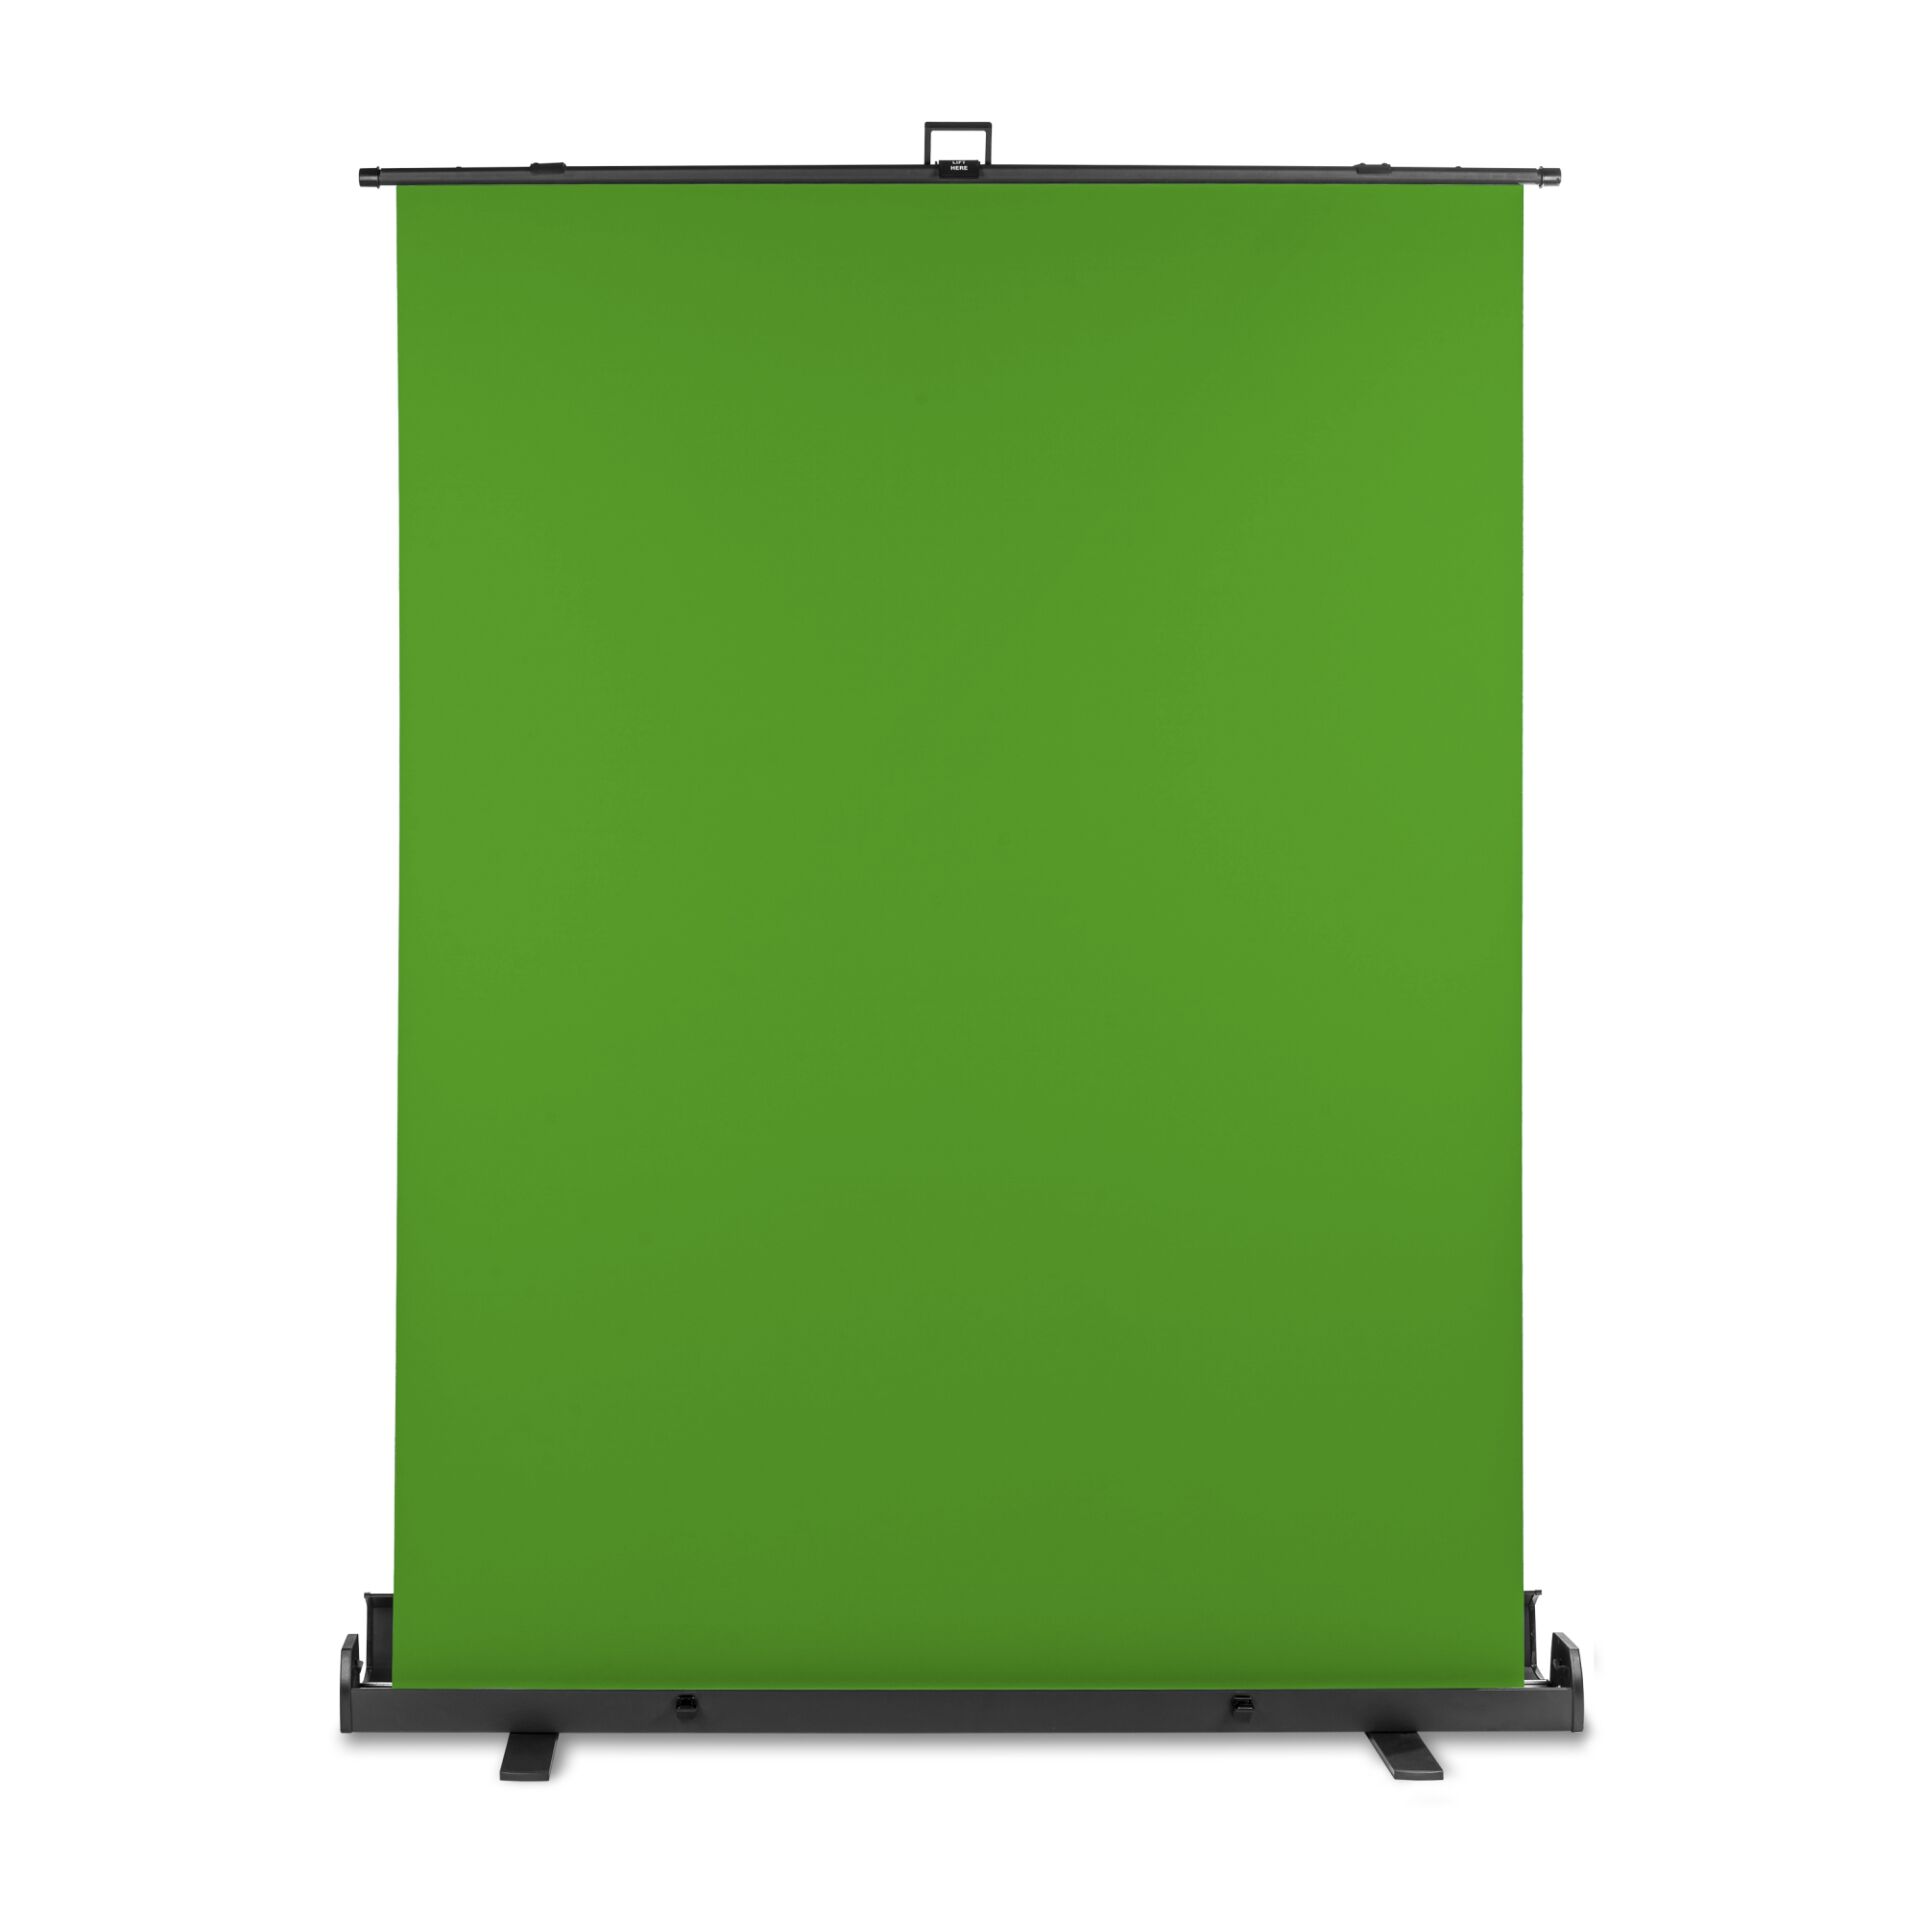 Walimex pro Roll-up Panel Background 155x200cm green